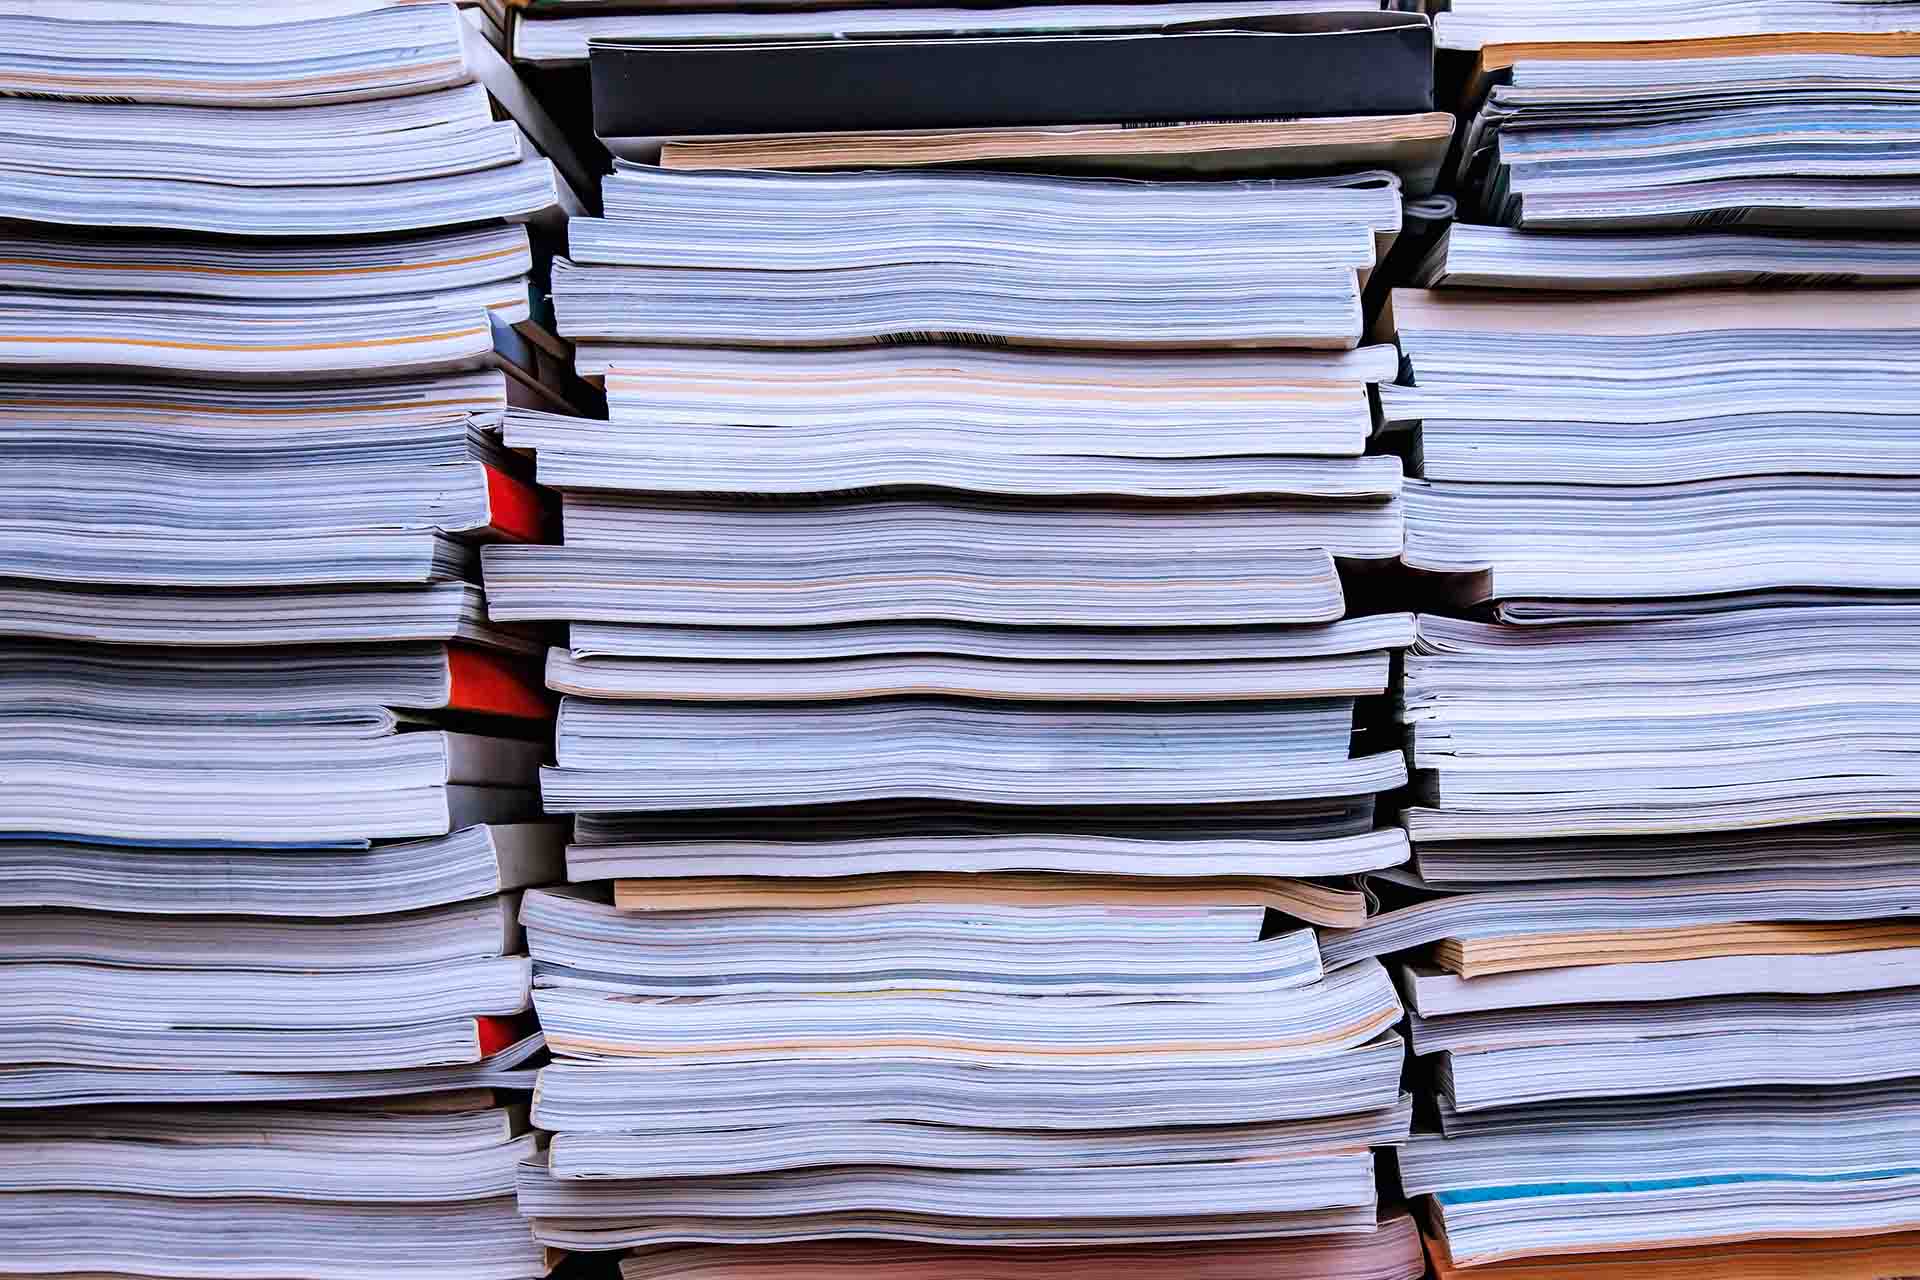 A close-up photograph of stacks of academic publications